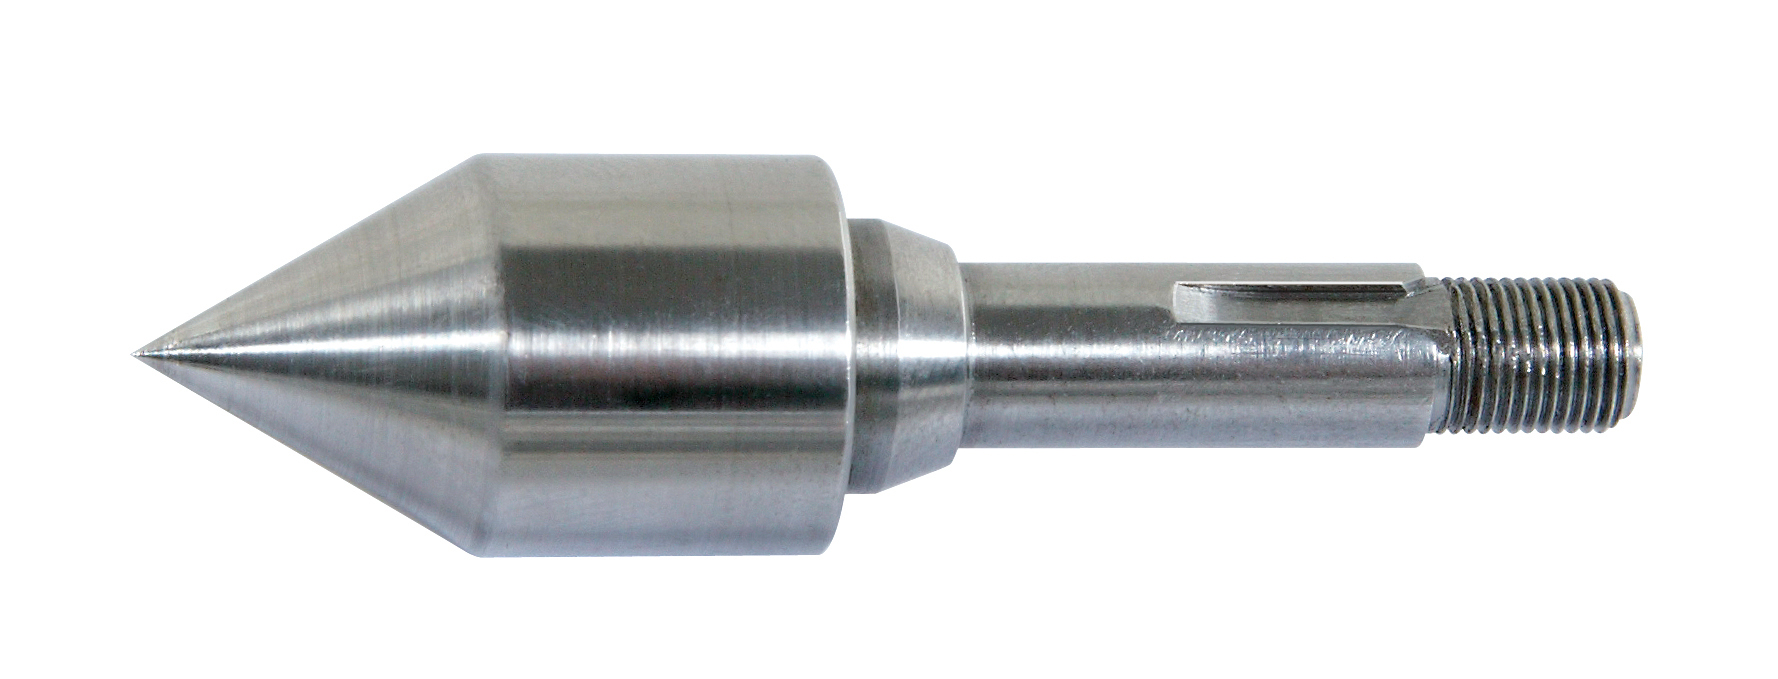 Insert with rotating tip